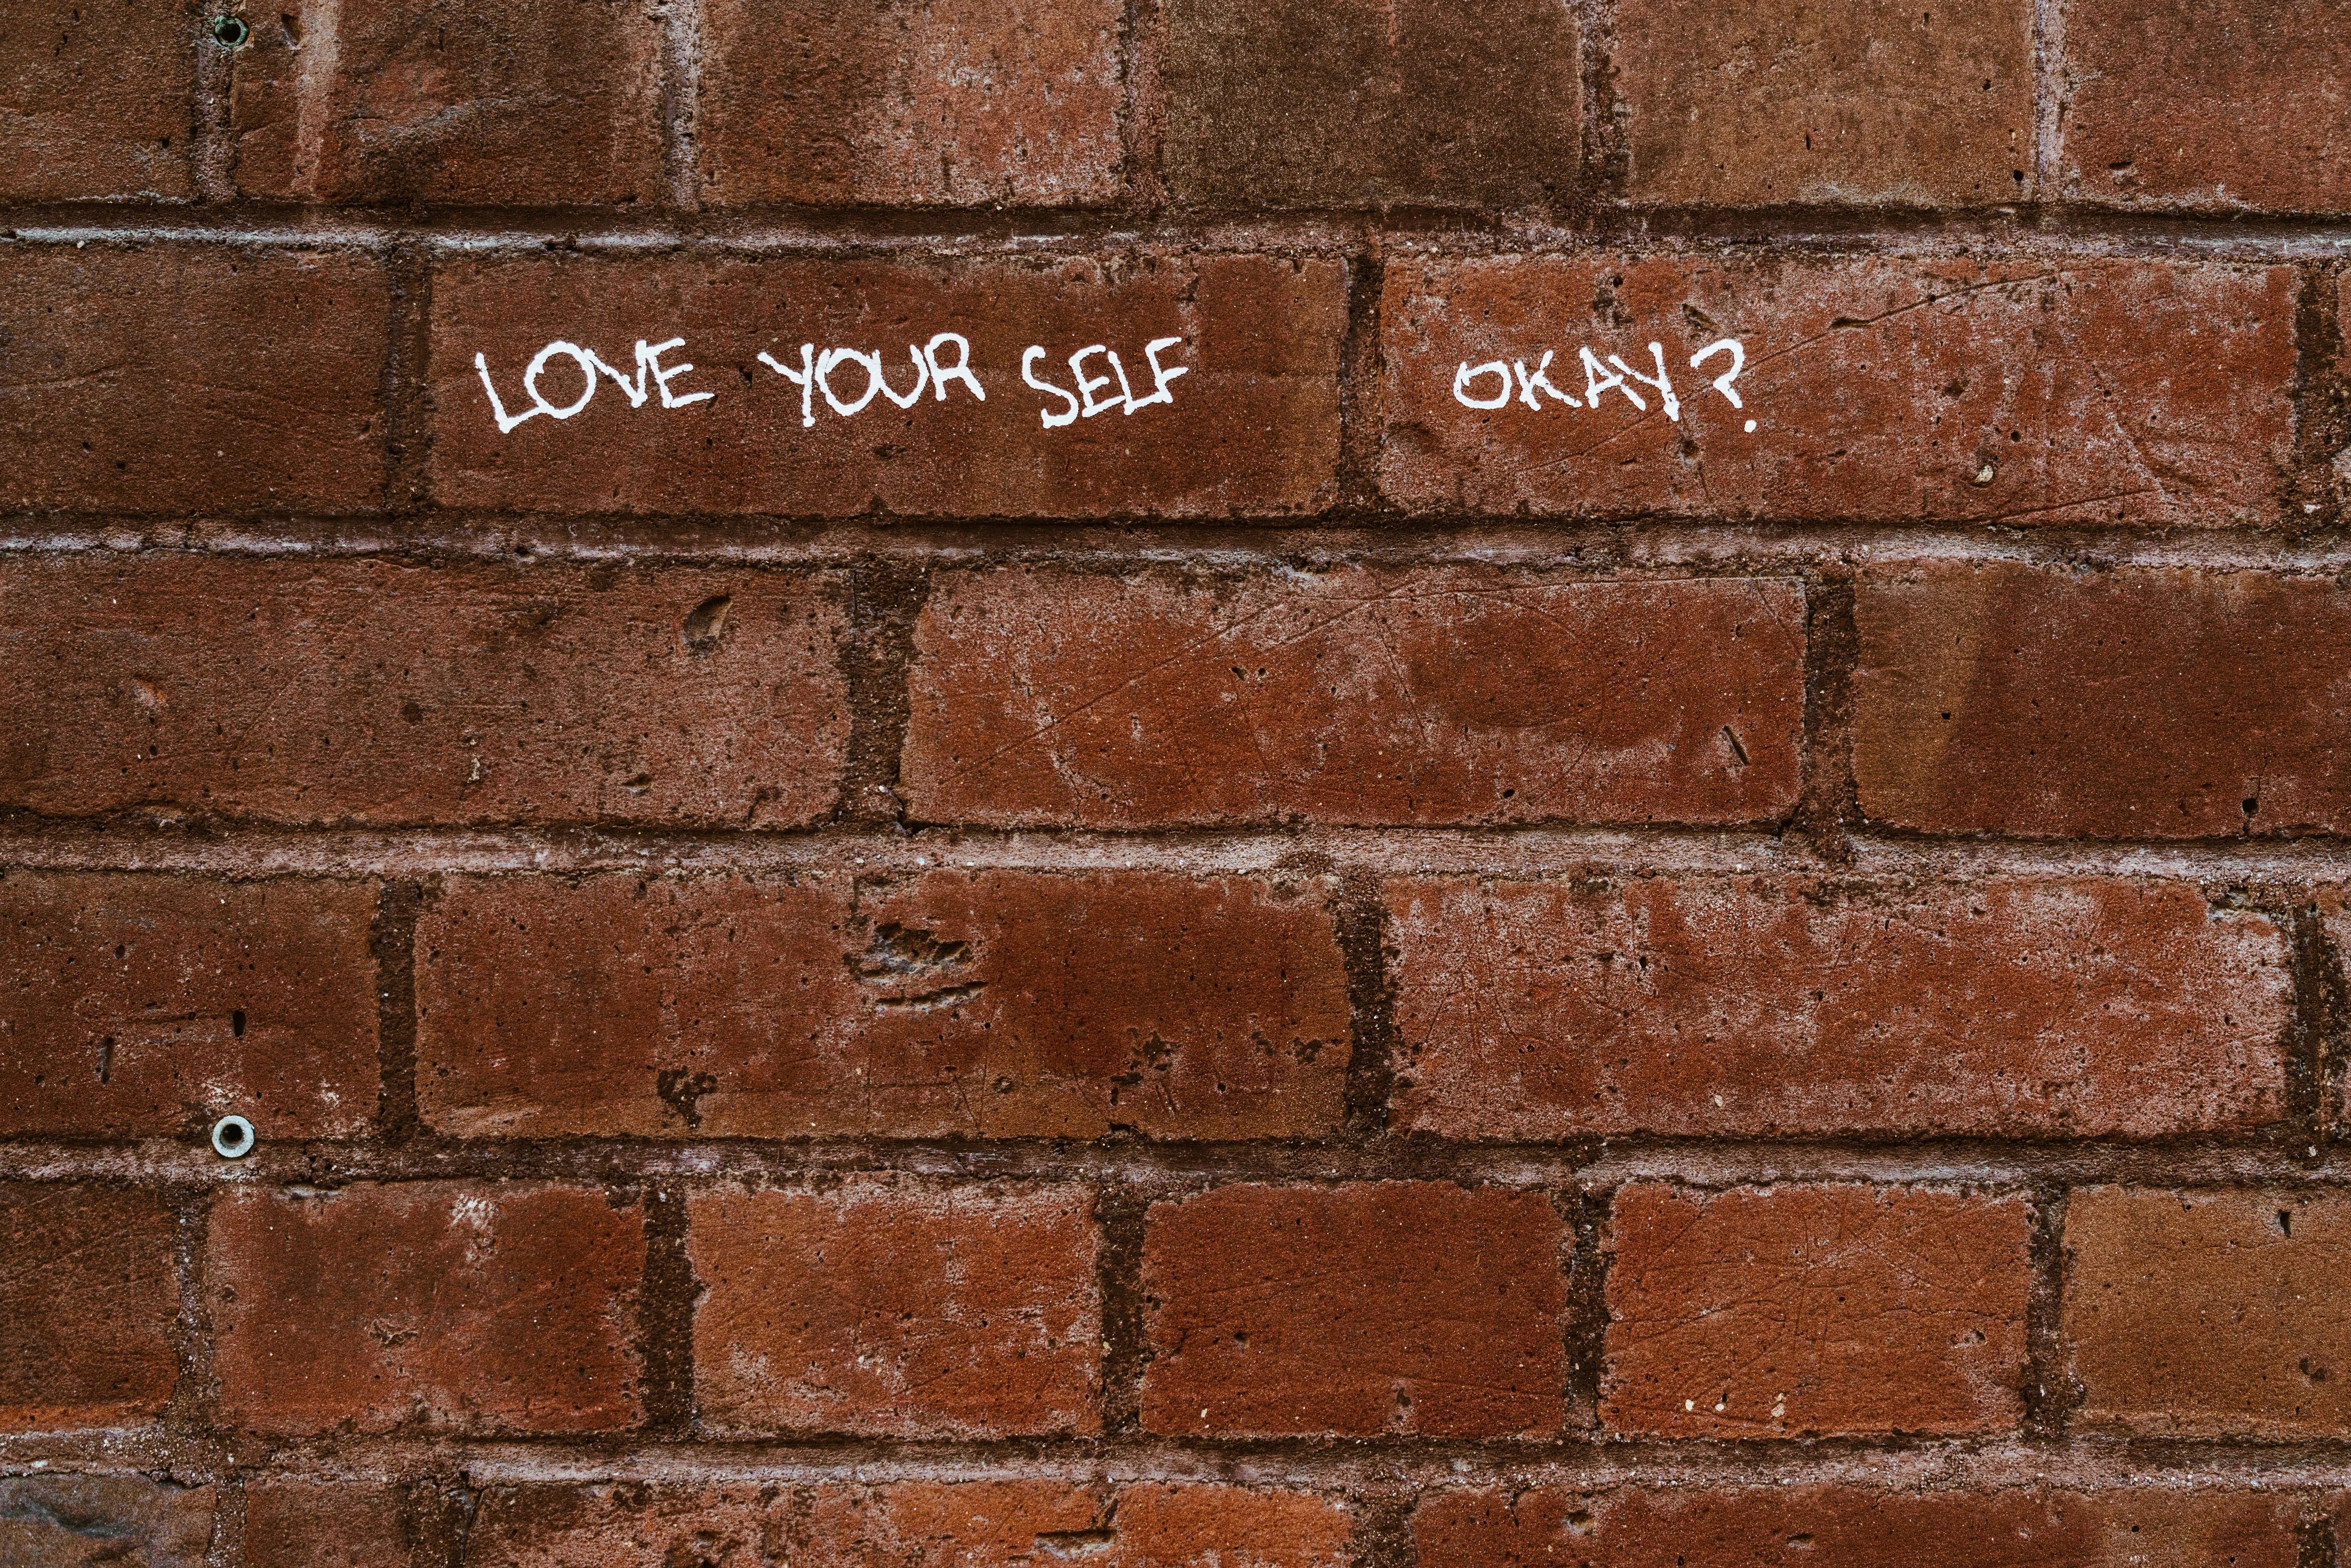 A brick wall with 'love yourself okay?' drawn on it